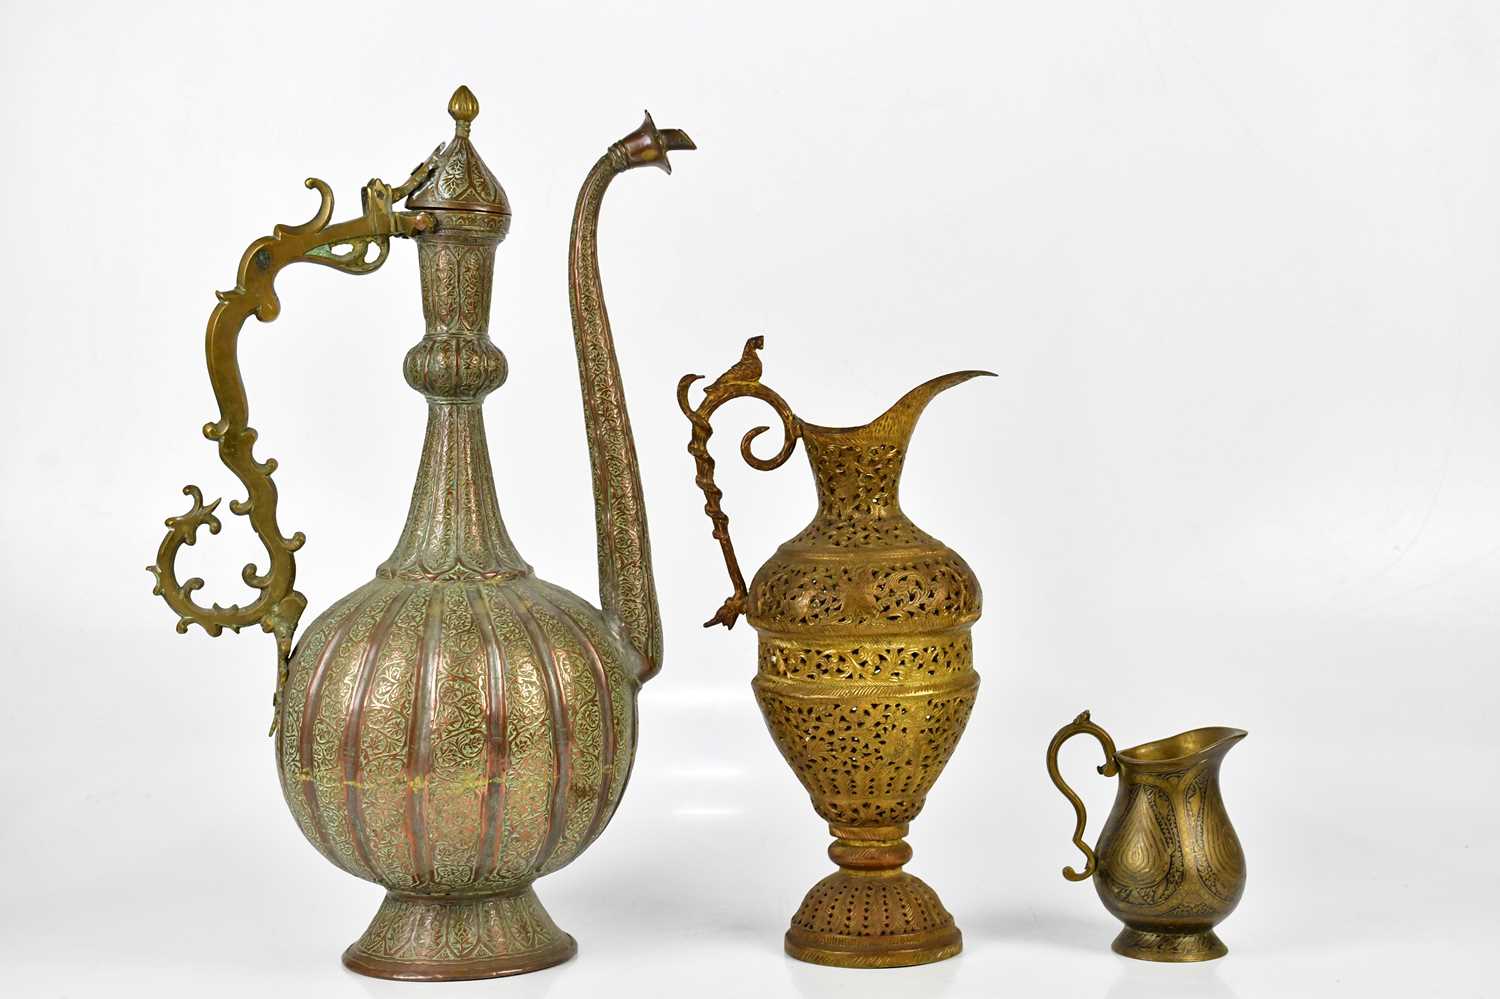 A large Persian ewer, height 49cm, together with a two smaller jugs.